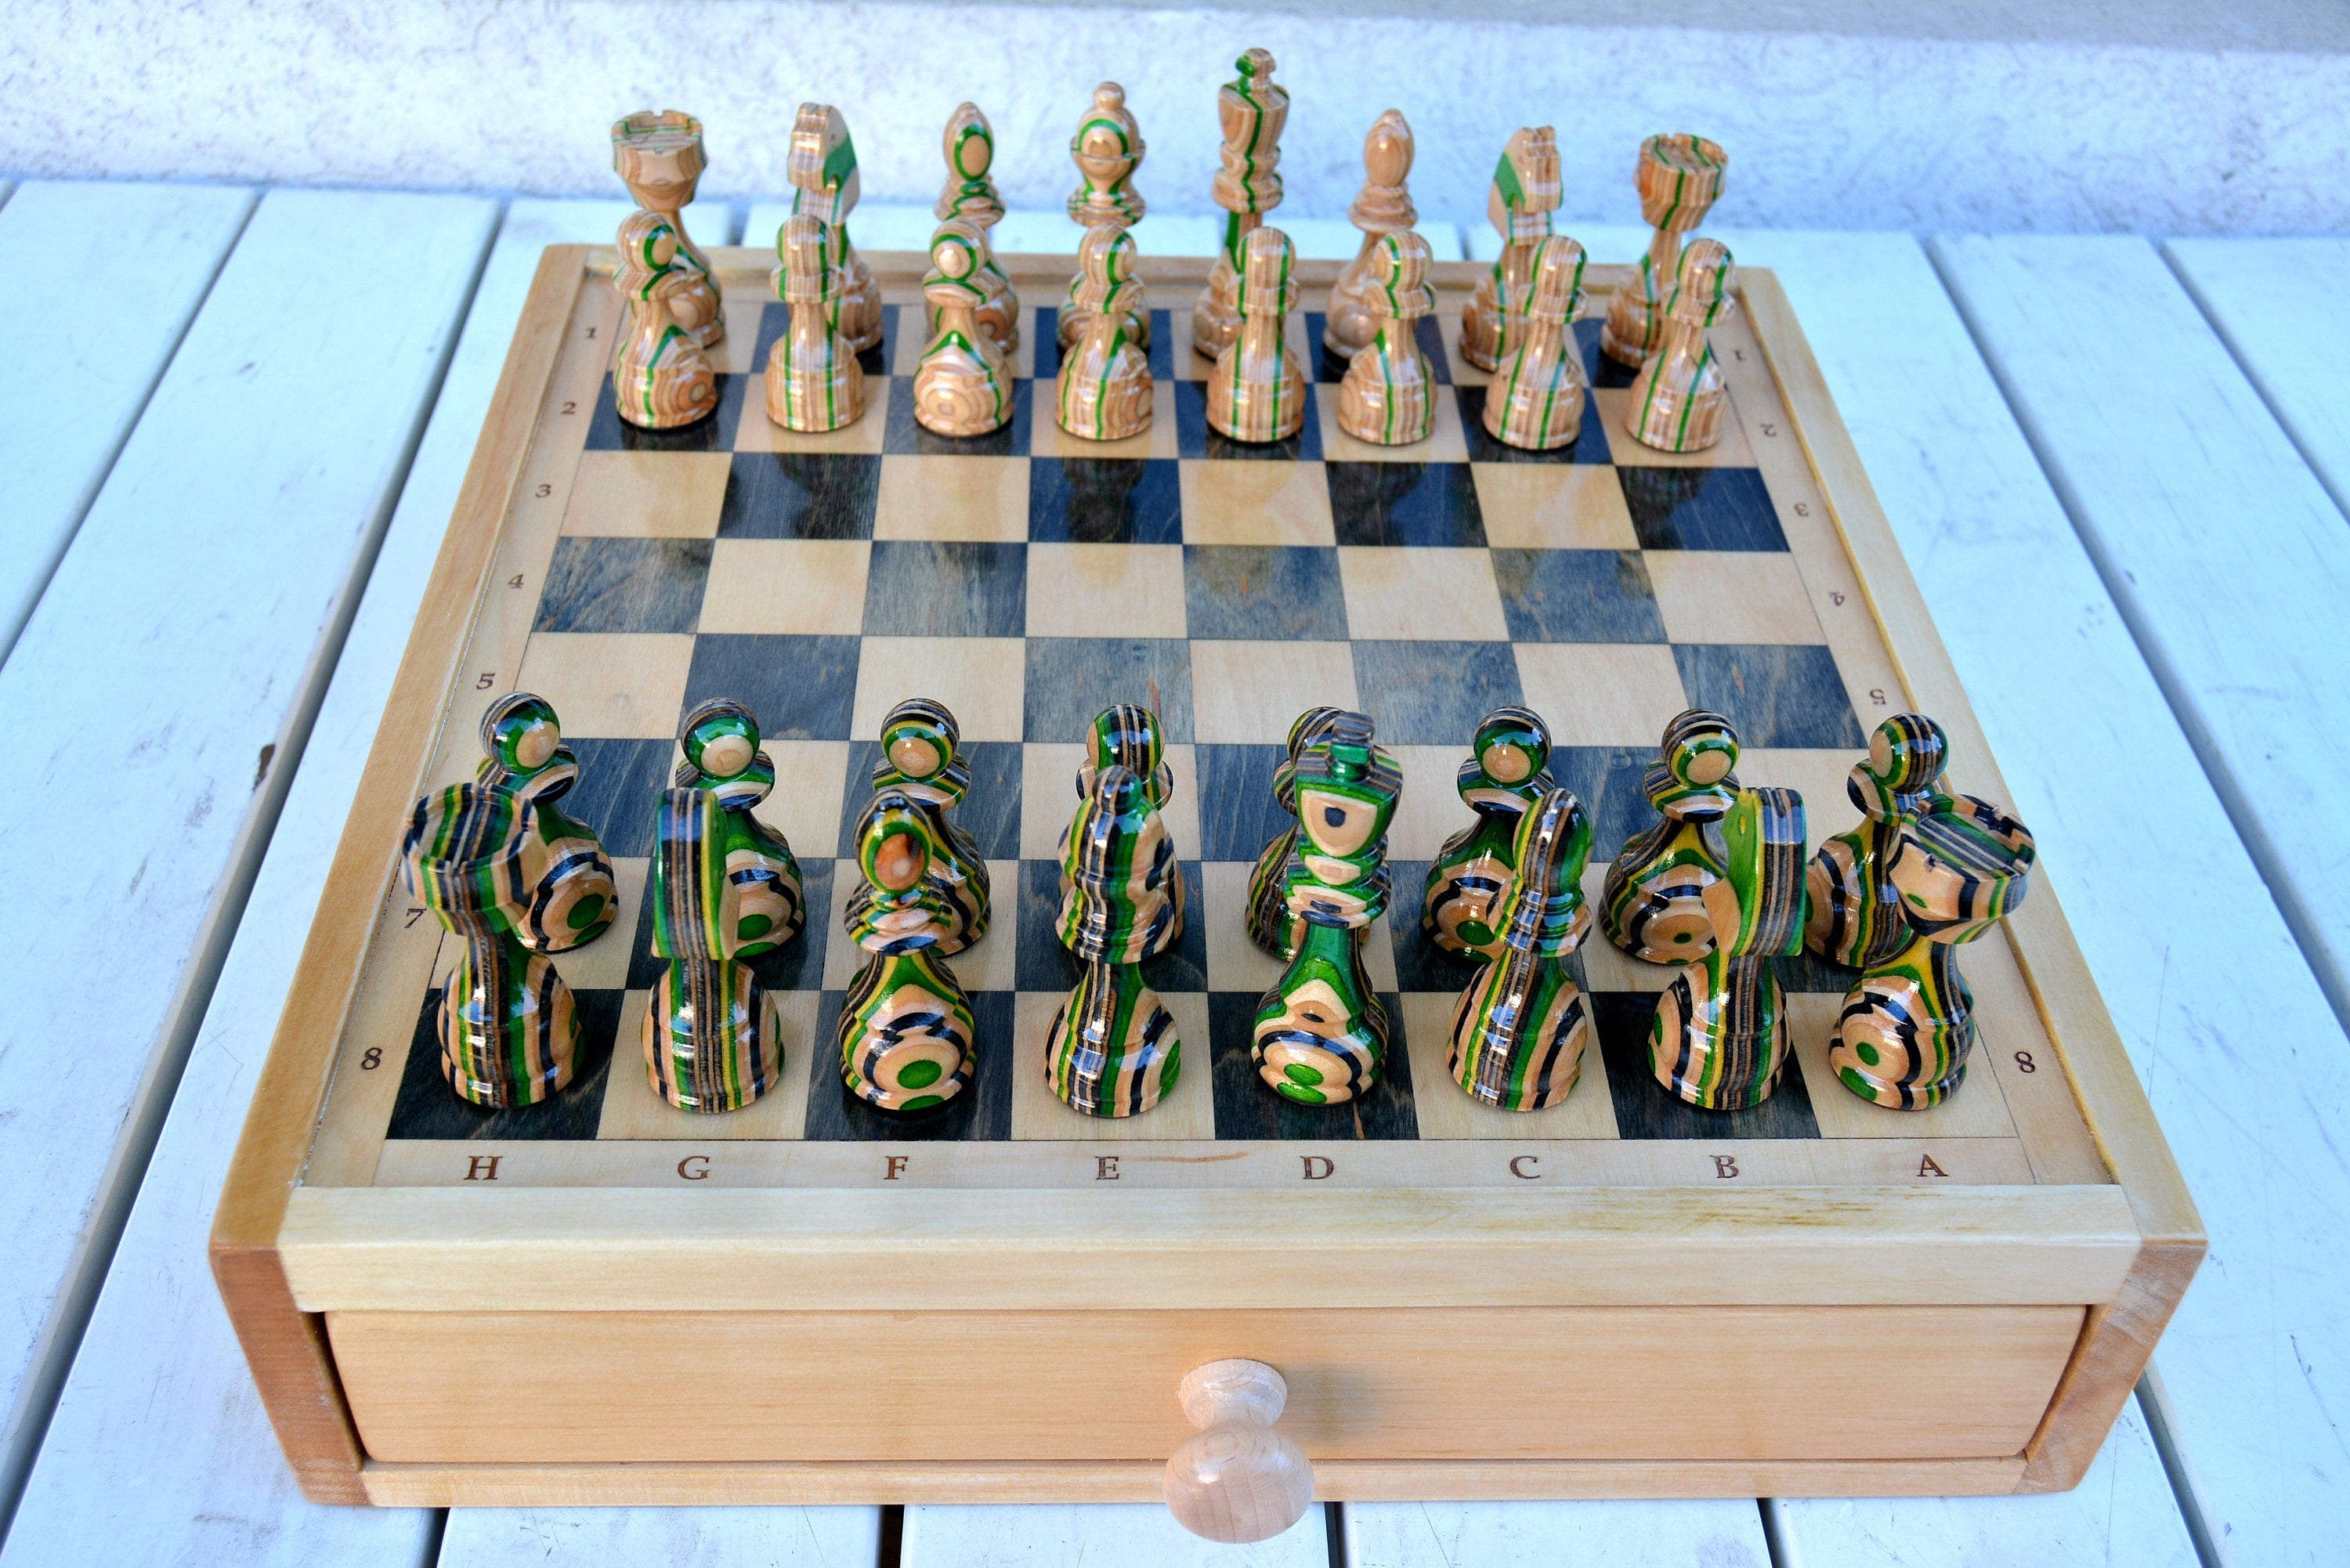 SALE Ultra Rare Vintage GUCCI Iconic Game Set Checkers Chess 